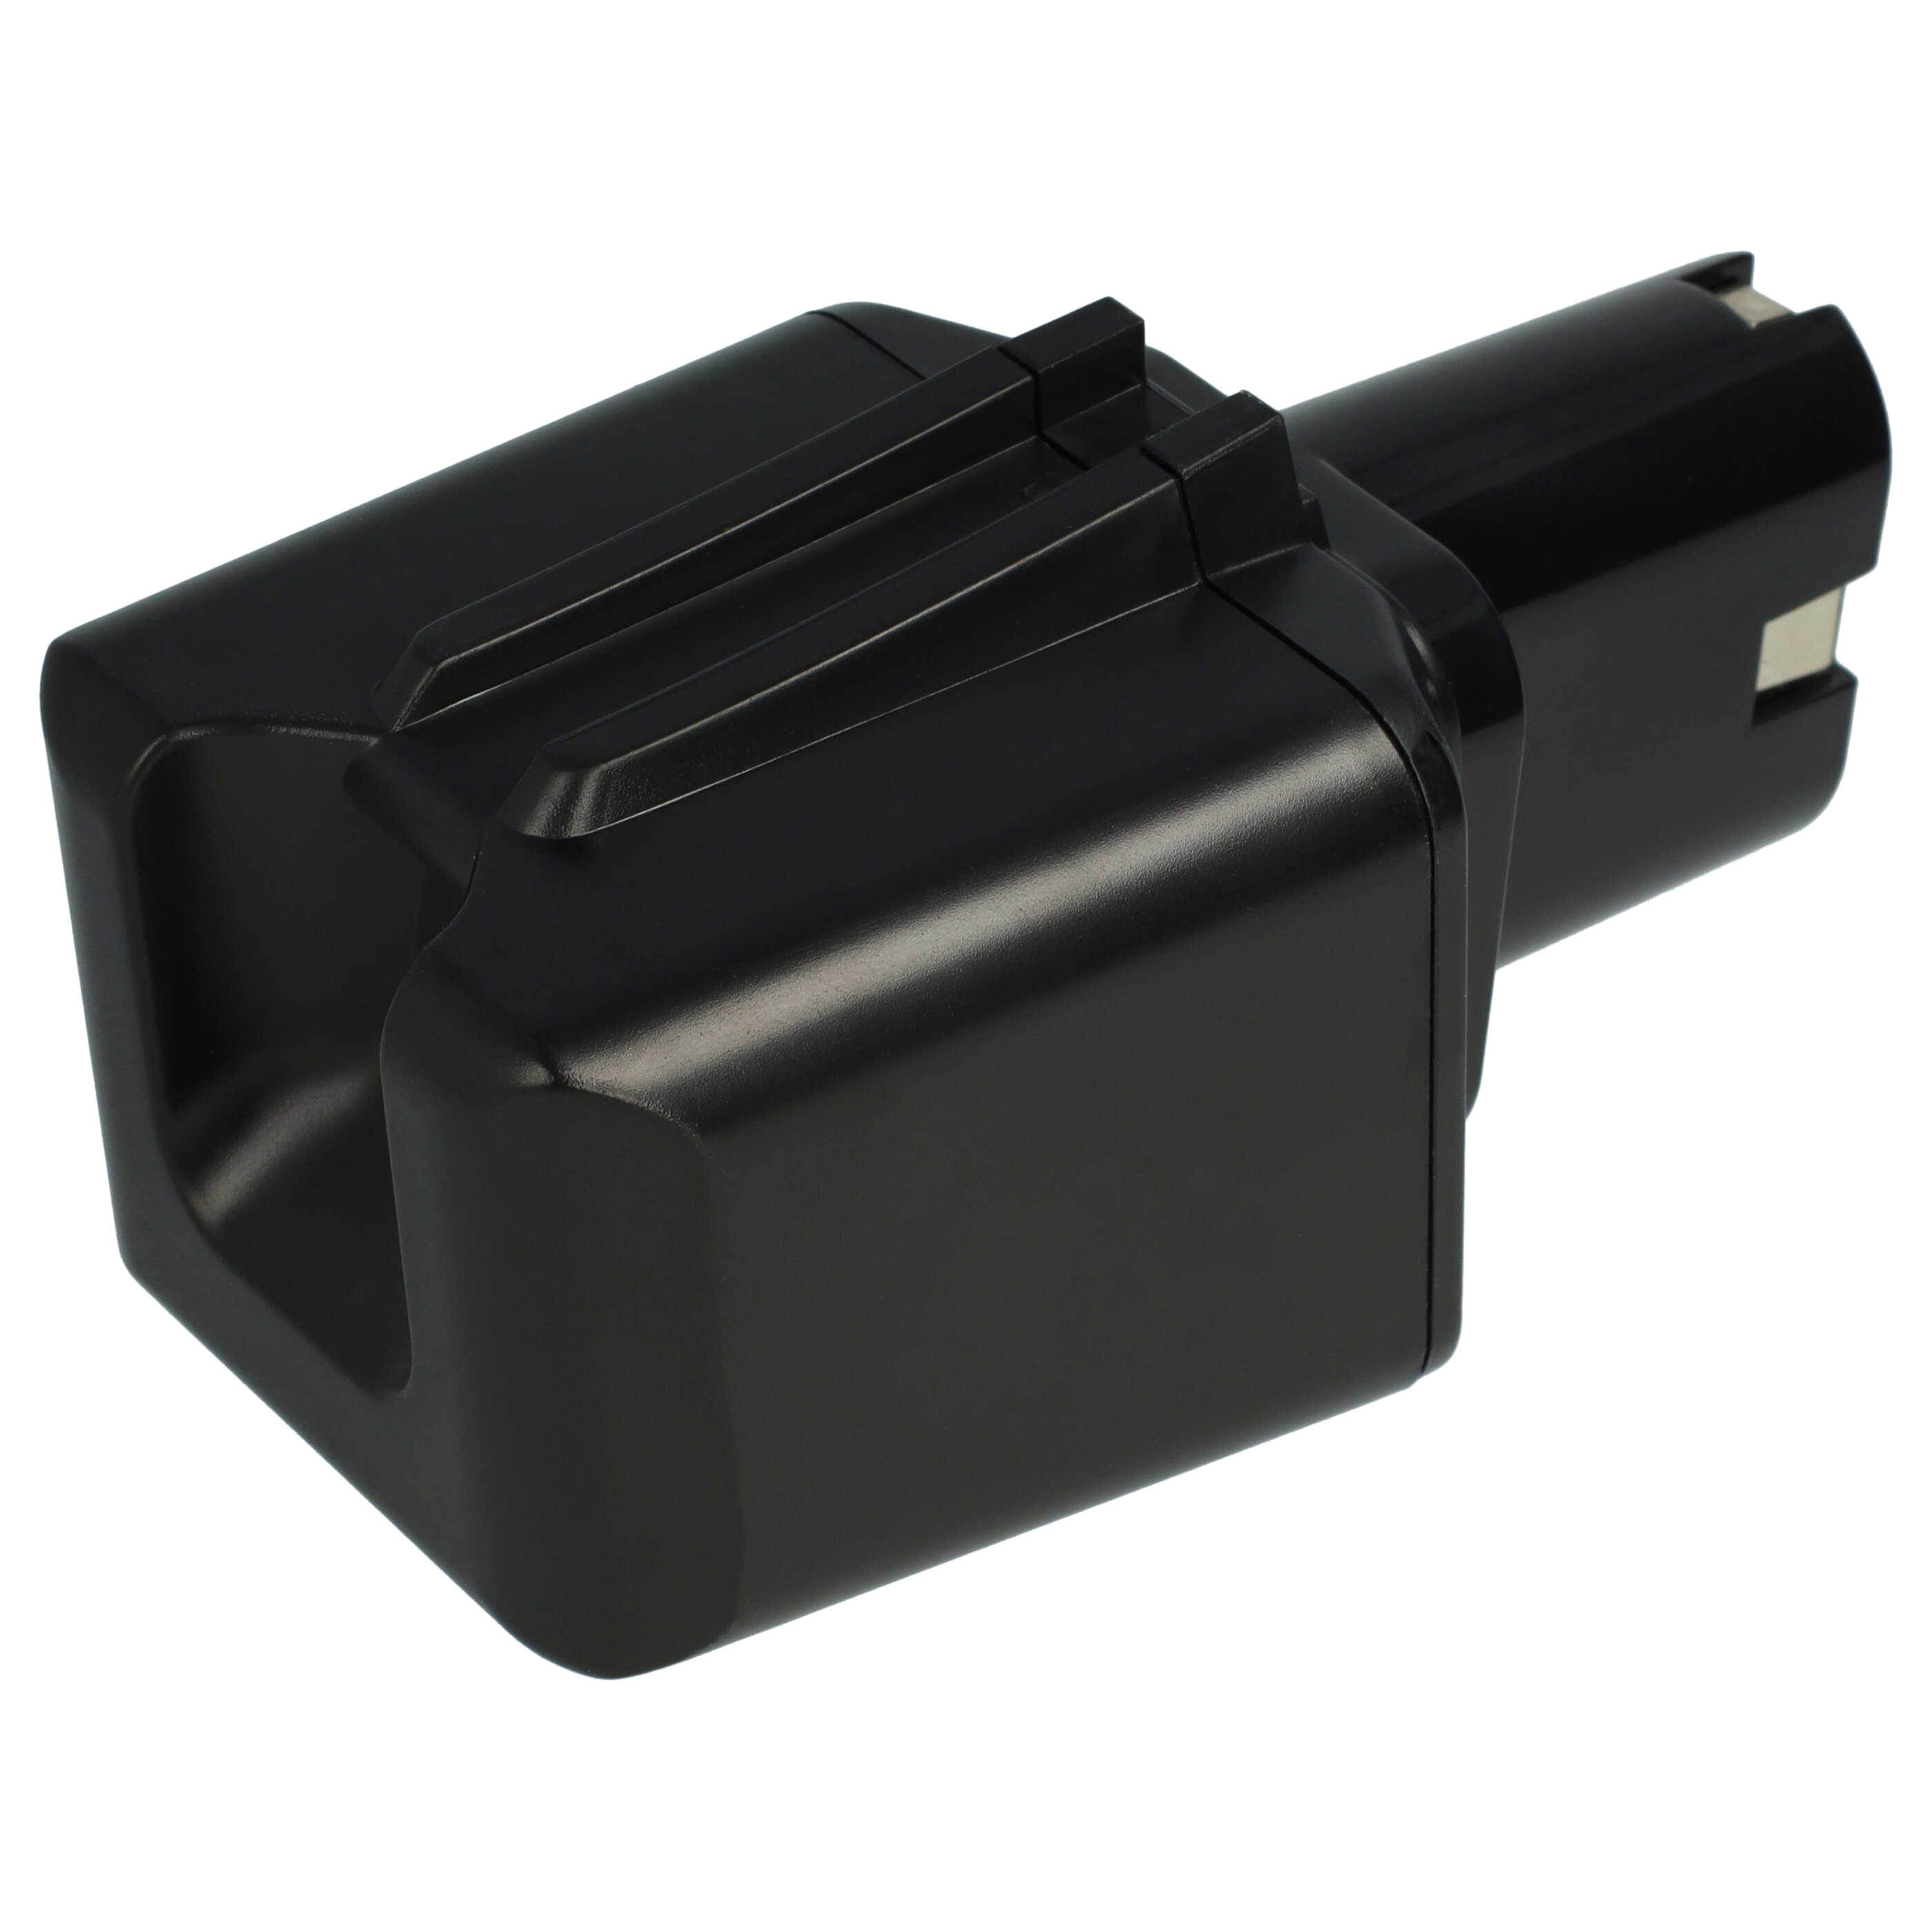 Electric Power Tool Battery Replaces Bosch 2607300002, 26073000002, 2 607 3000 002 - 4500 mAh, 9.6 V, NiMH